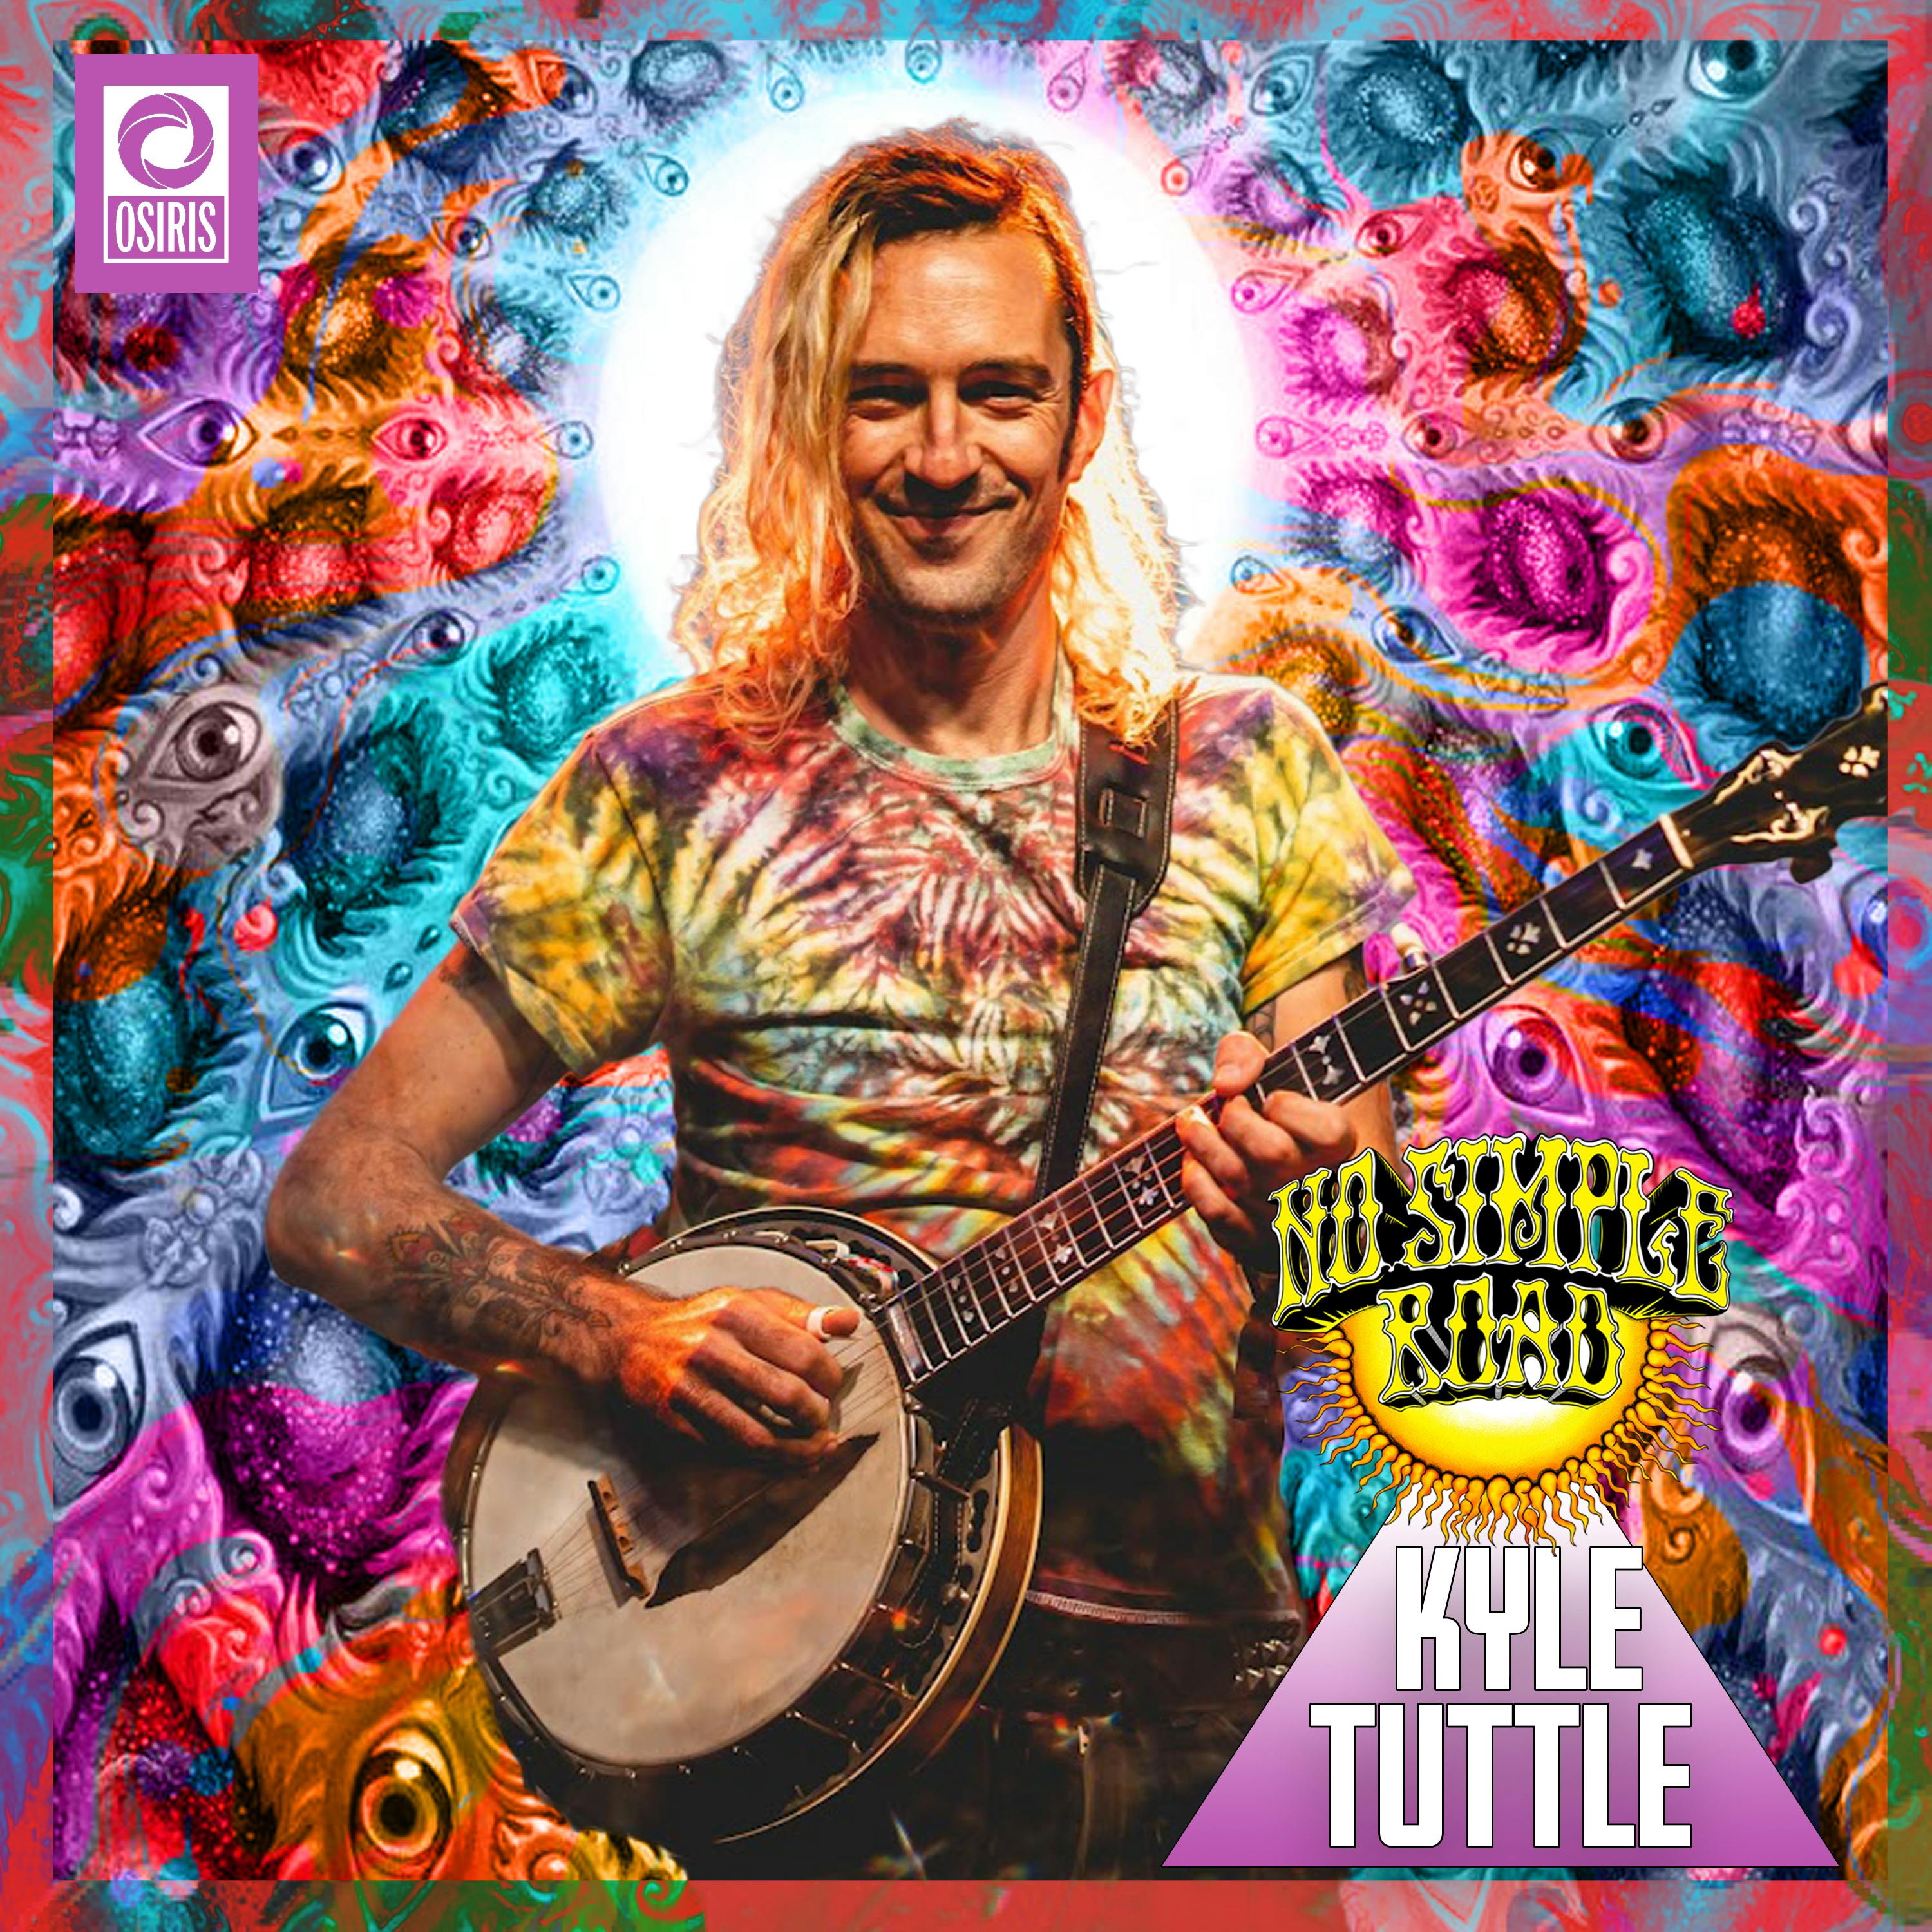 Kyle Tuttle - Banjos, Bluegrass, and the Beat of Self-Discovery